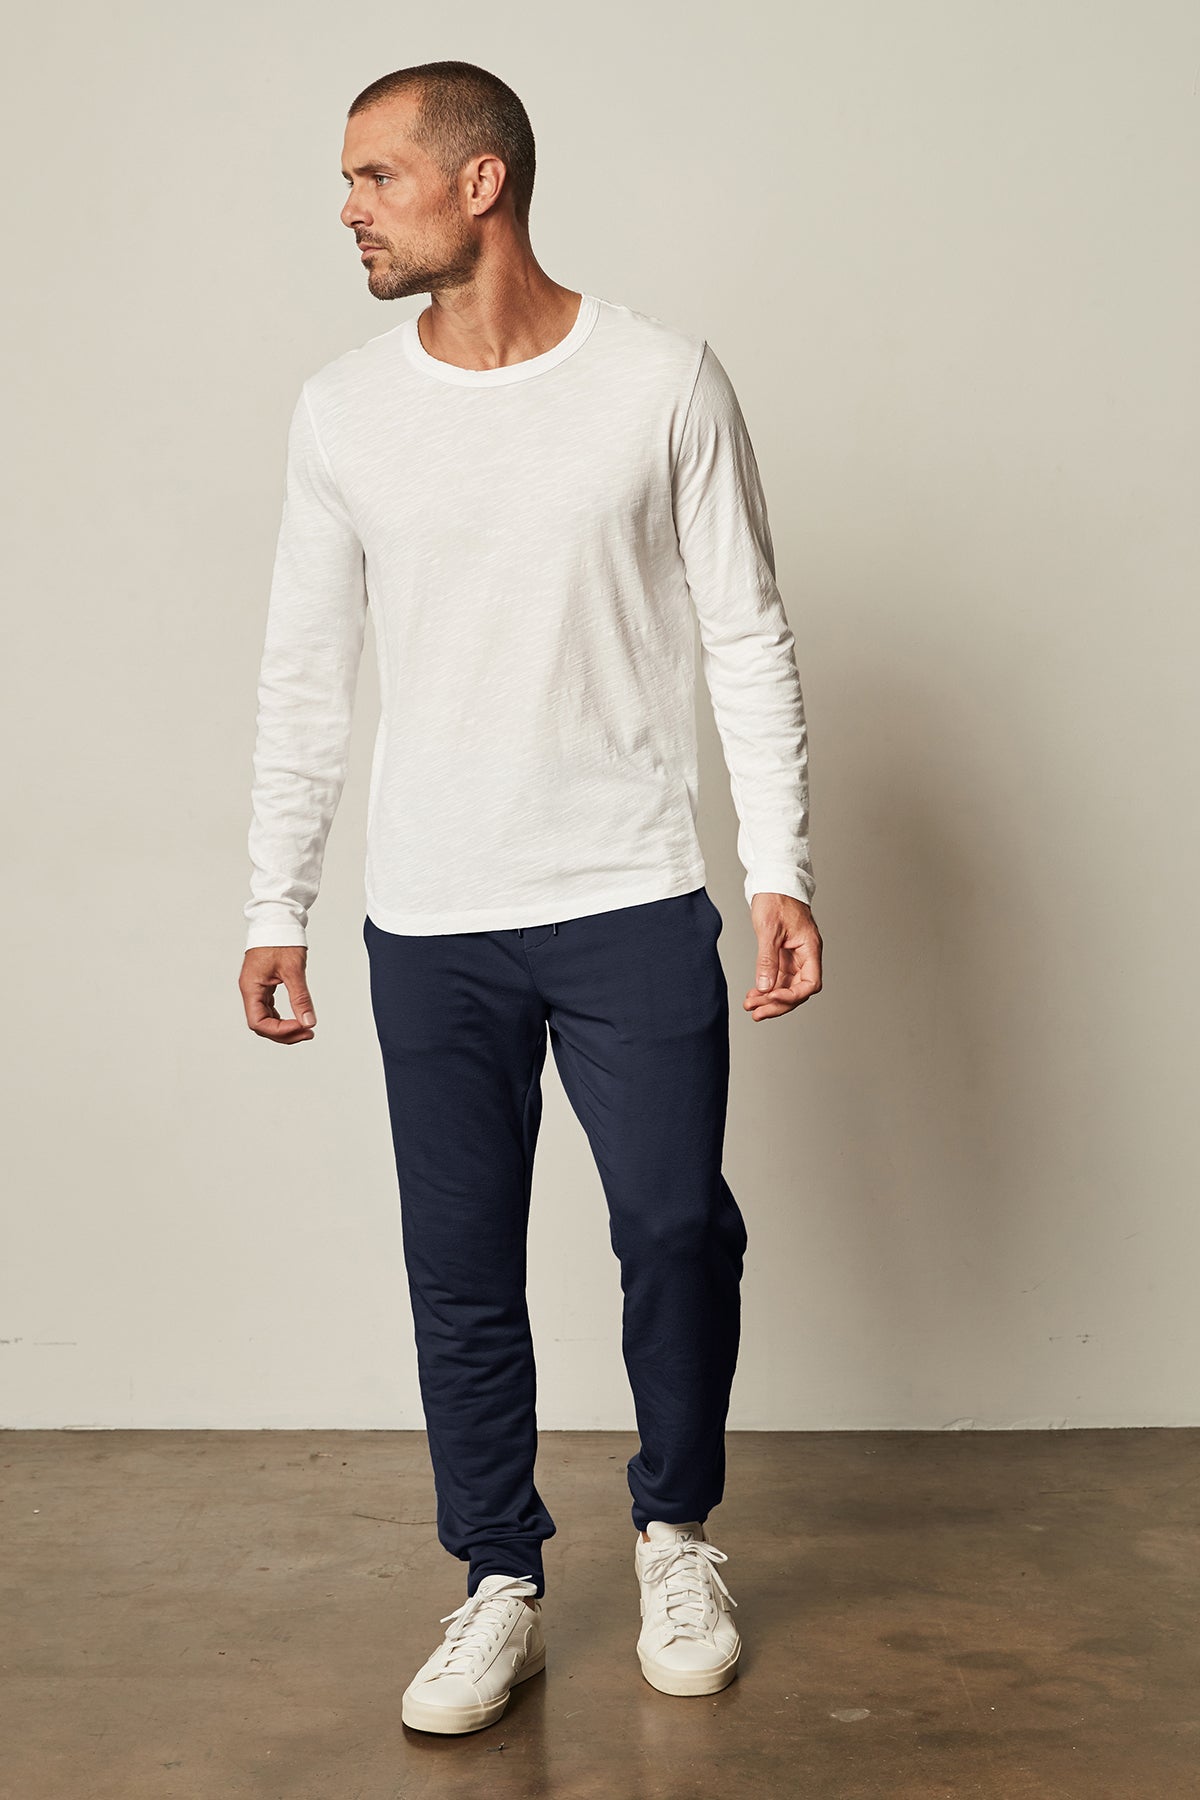   The model is wearing a white t-shirt and navy Velvet by Graham & Spencer CROSBY LUXE FLEECE JOGGER sweatpants. 